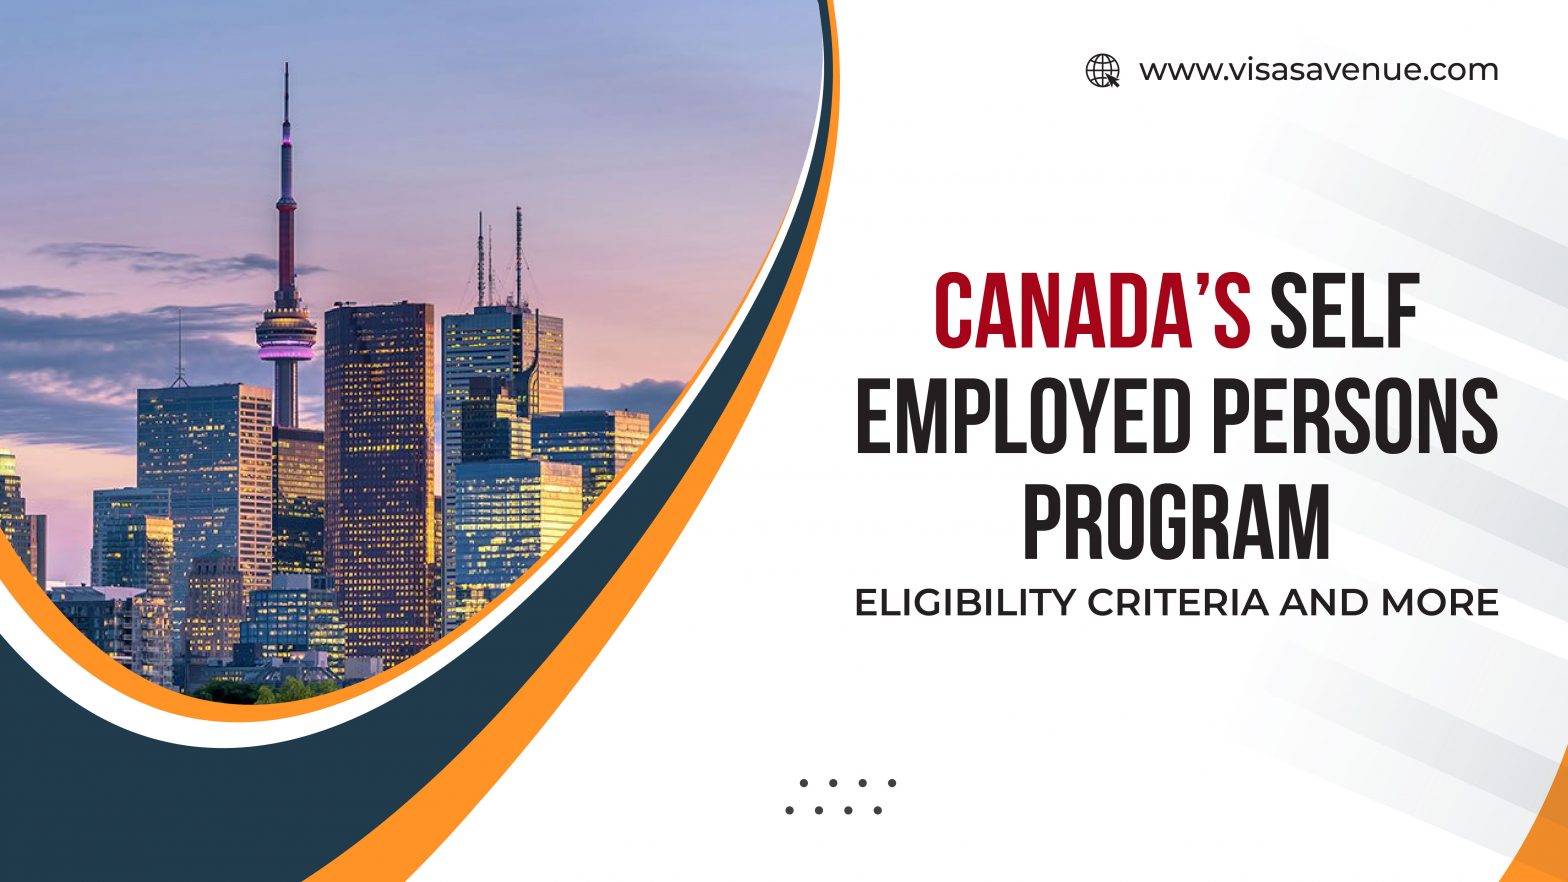 Canada’s Self Employed Persons Program